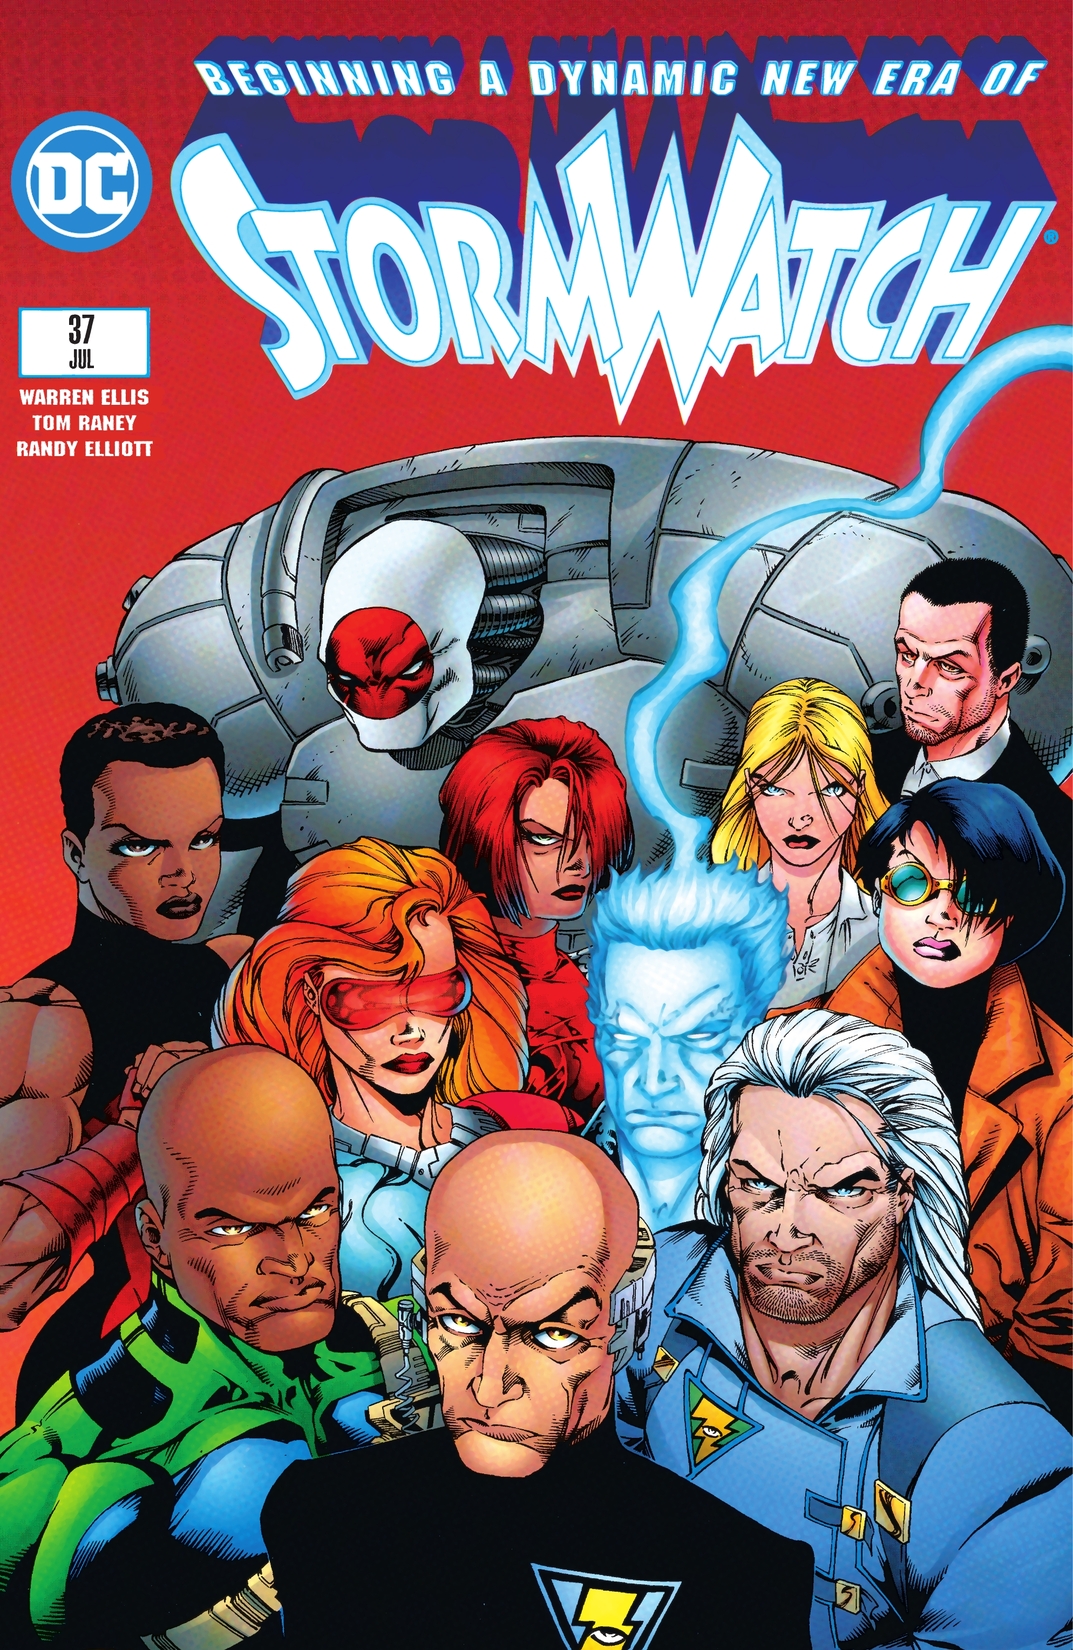 Stormwatch (1993-1997) #37 preview images